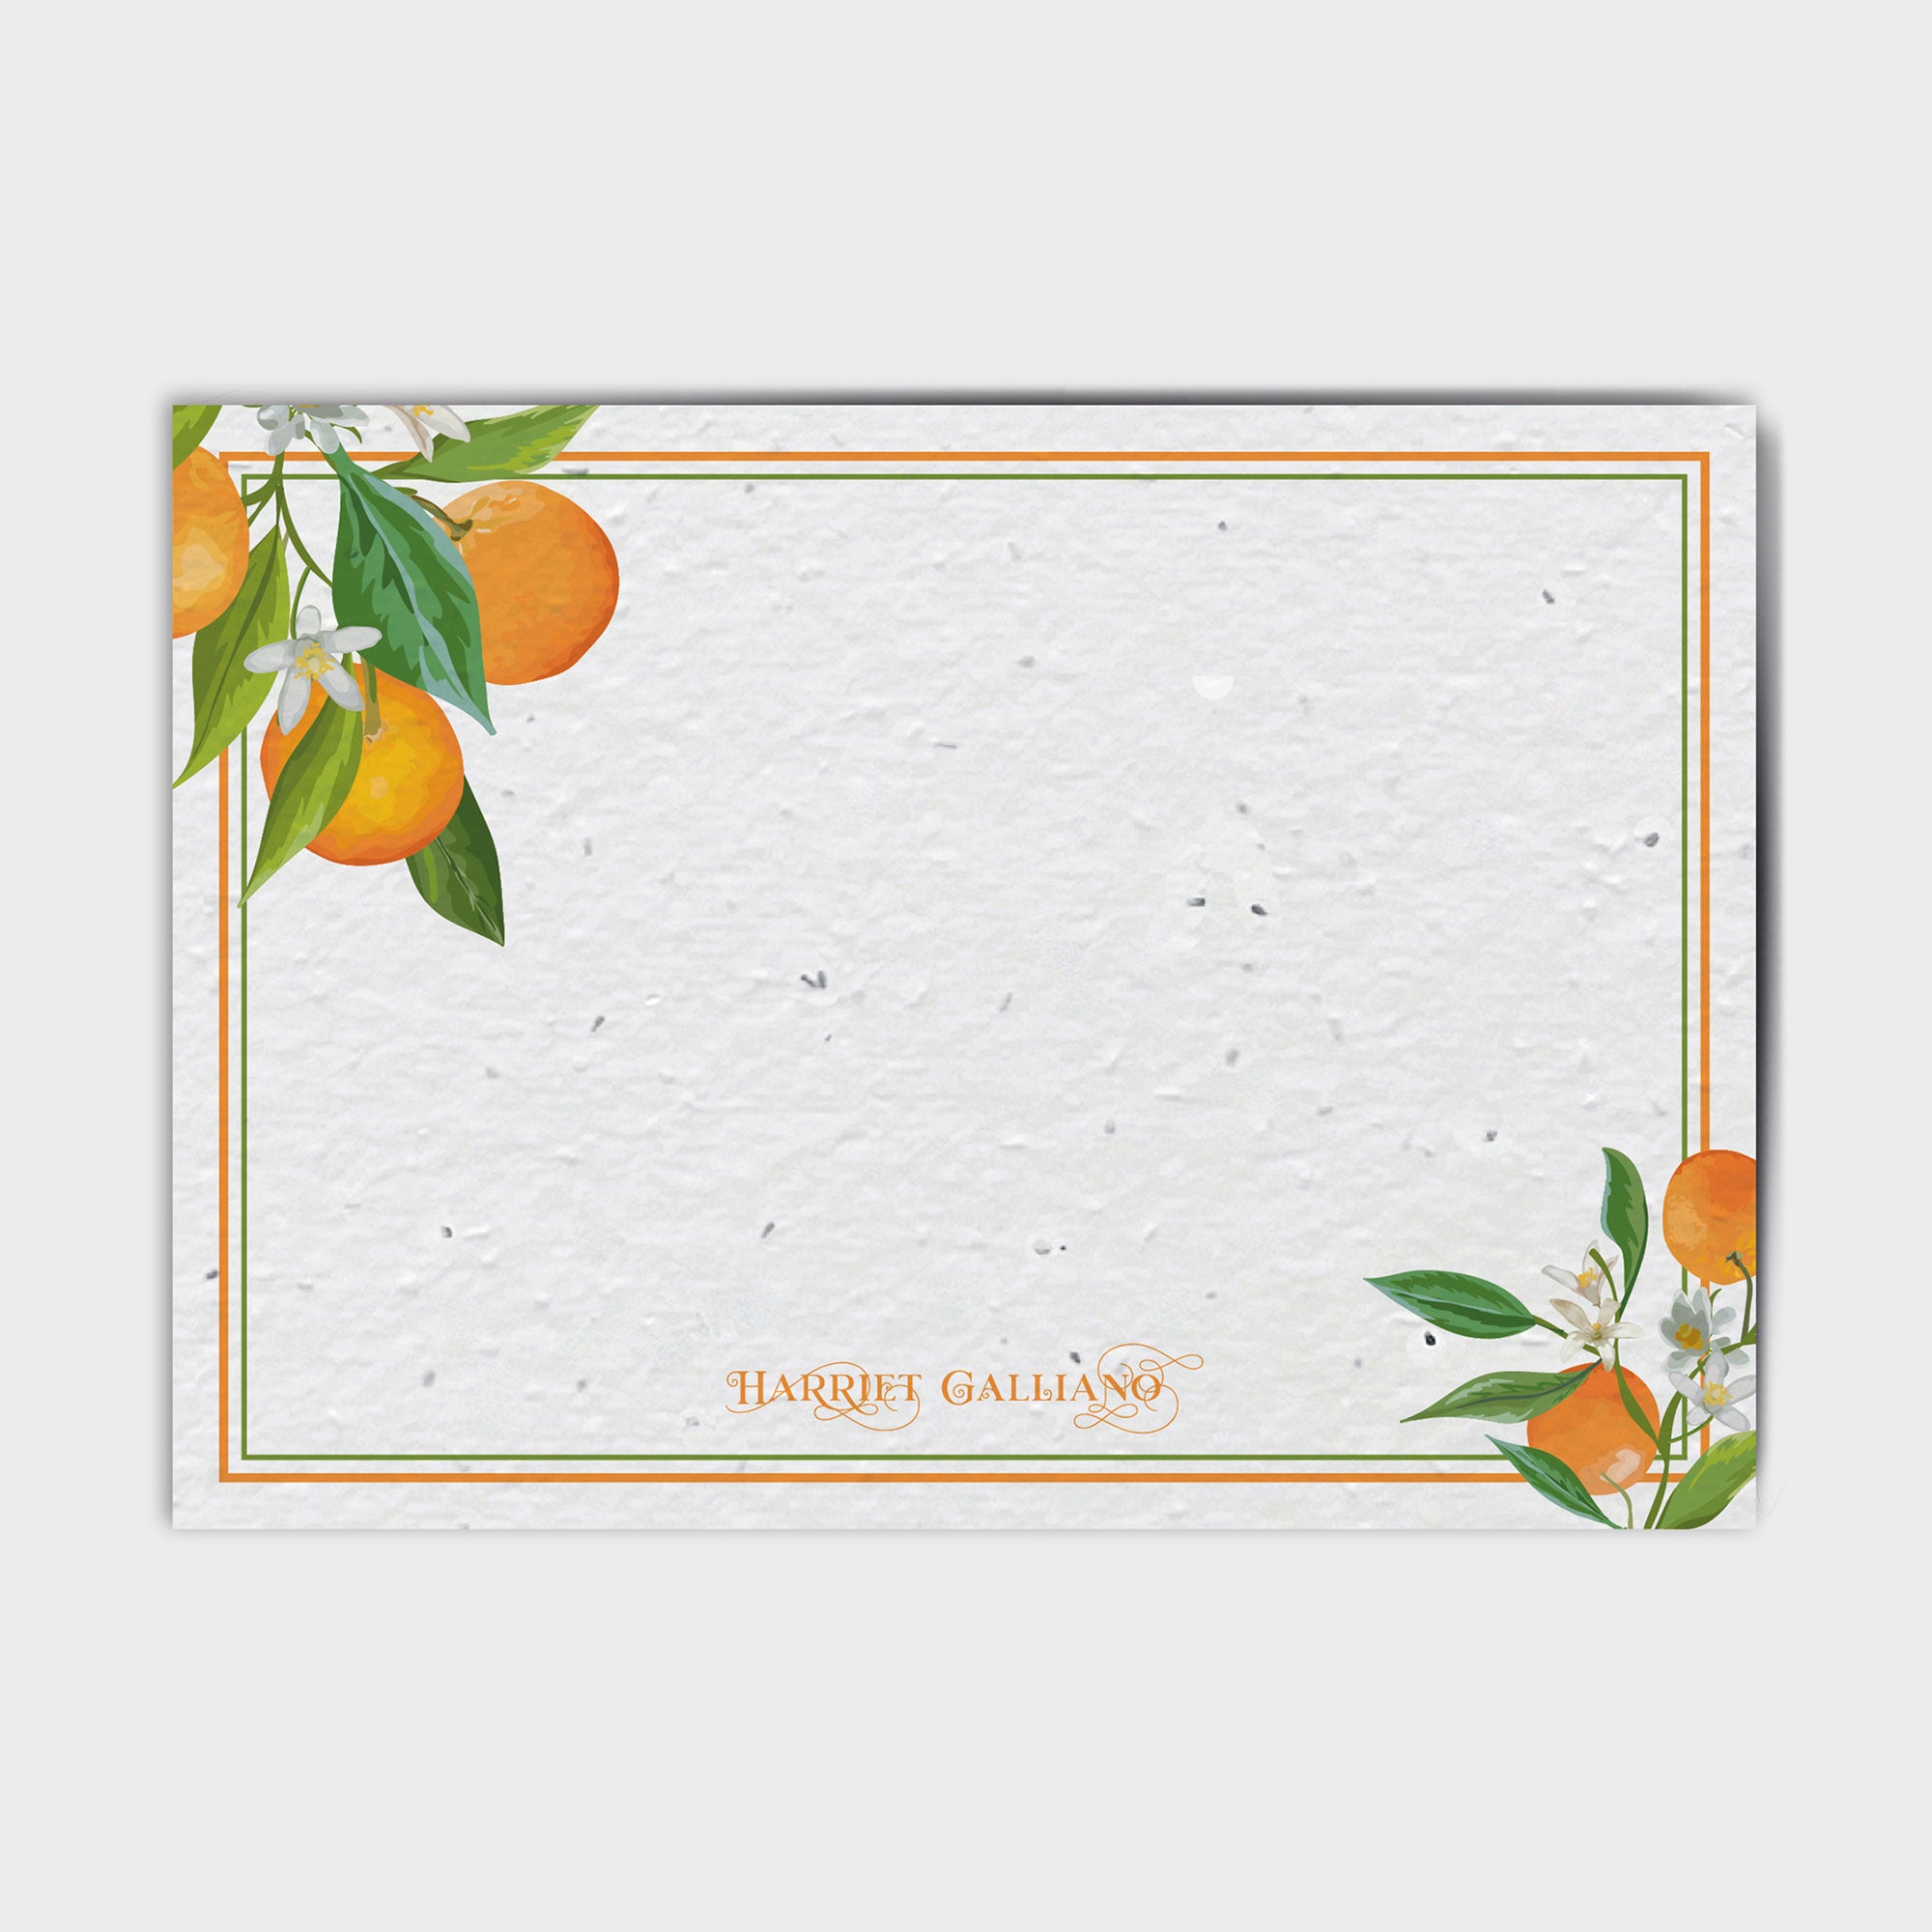 Shop online Orange Keyline - 100% biodegradable seed-embedded cards Shop -The Seed Card Company